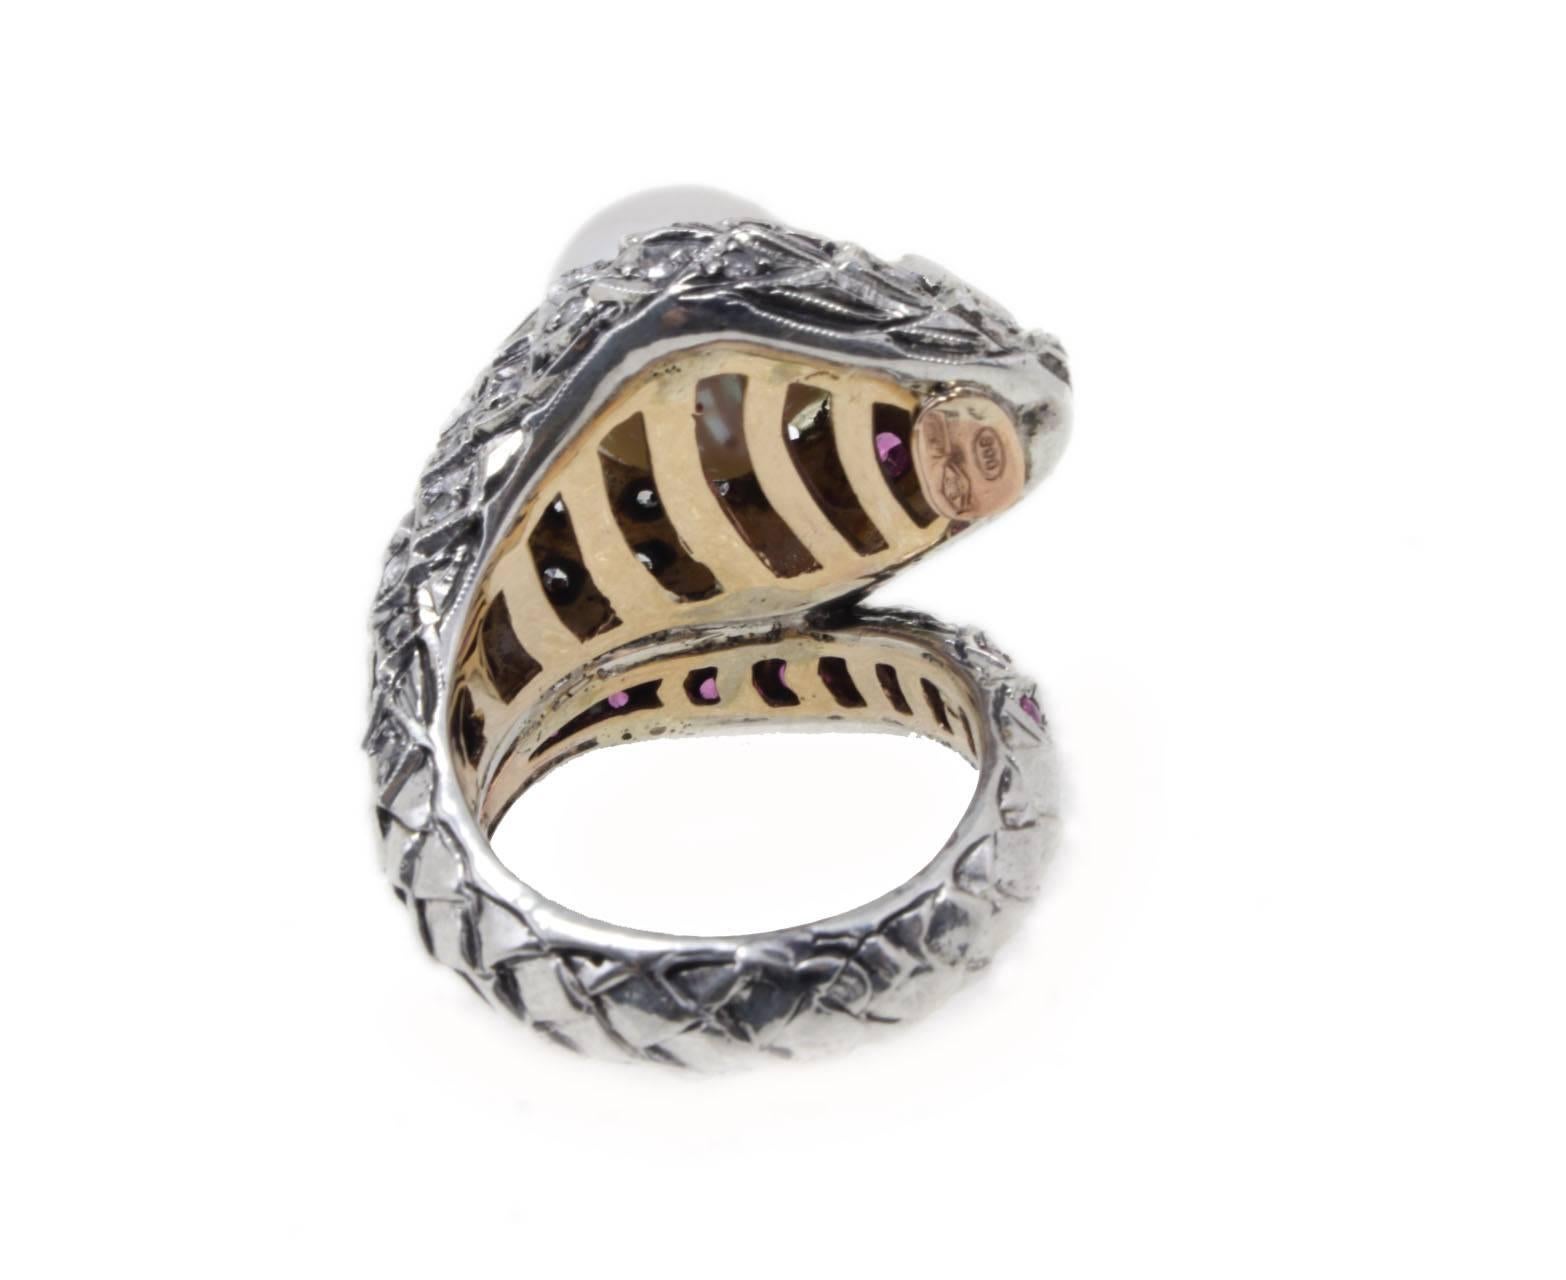 shipping policy: 
No additional costs will be added to this order.
Shipping costs will be totally covered by the seller (customs duties included). 


Sparkling and graceful cocktail and fashion ring snake shape. All is mounted in 9Kt rose gold and